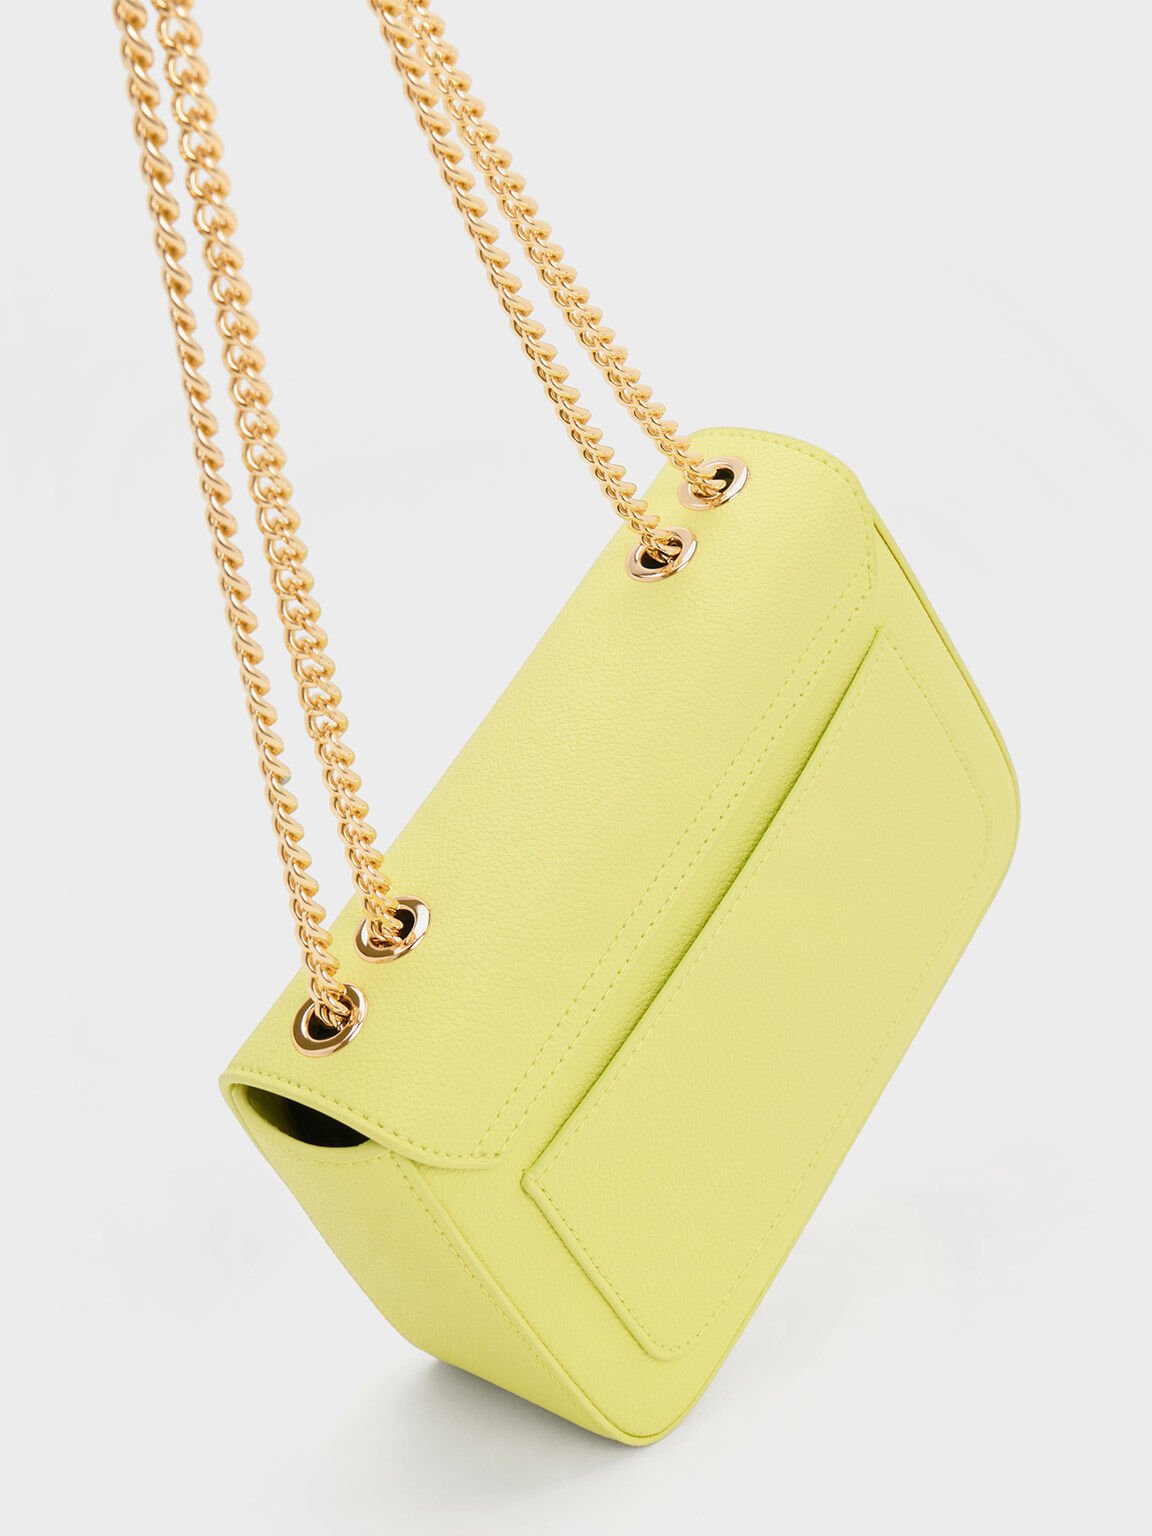 Butter Chain Strap Shoulder Bag - CHARLES & KEITH MY